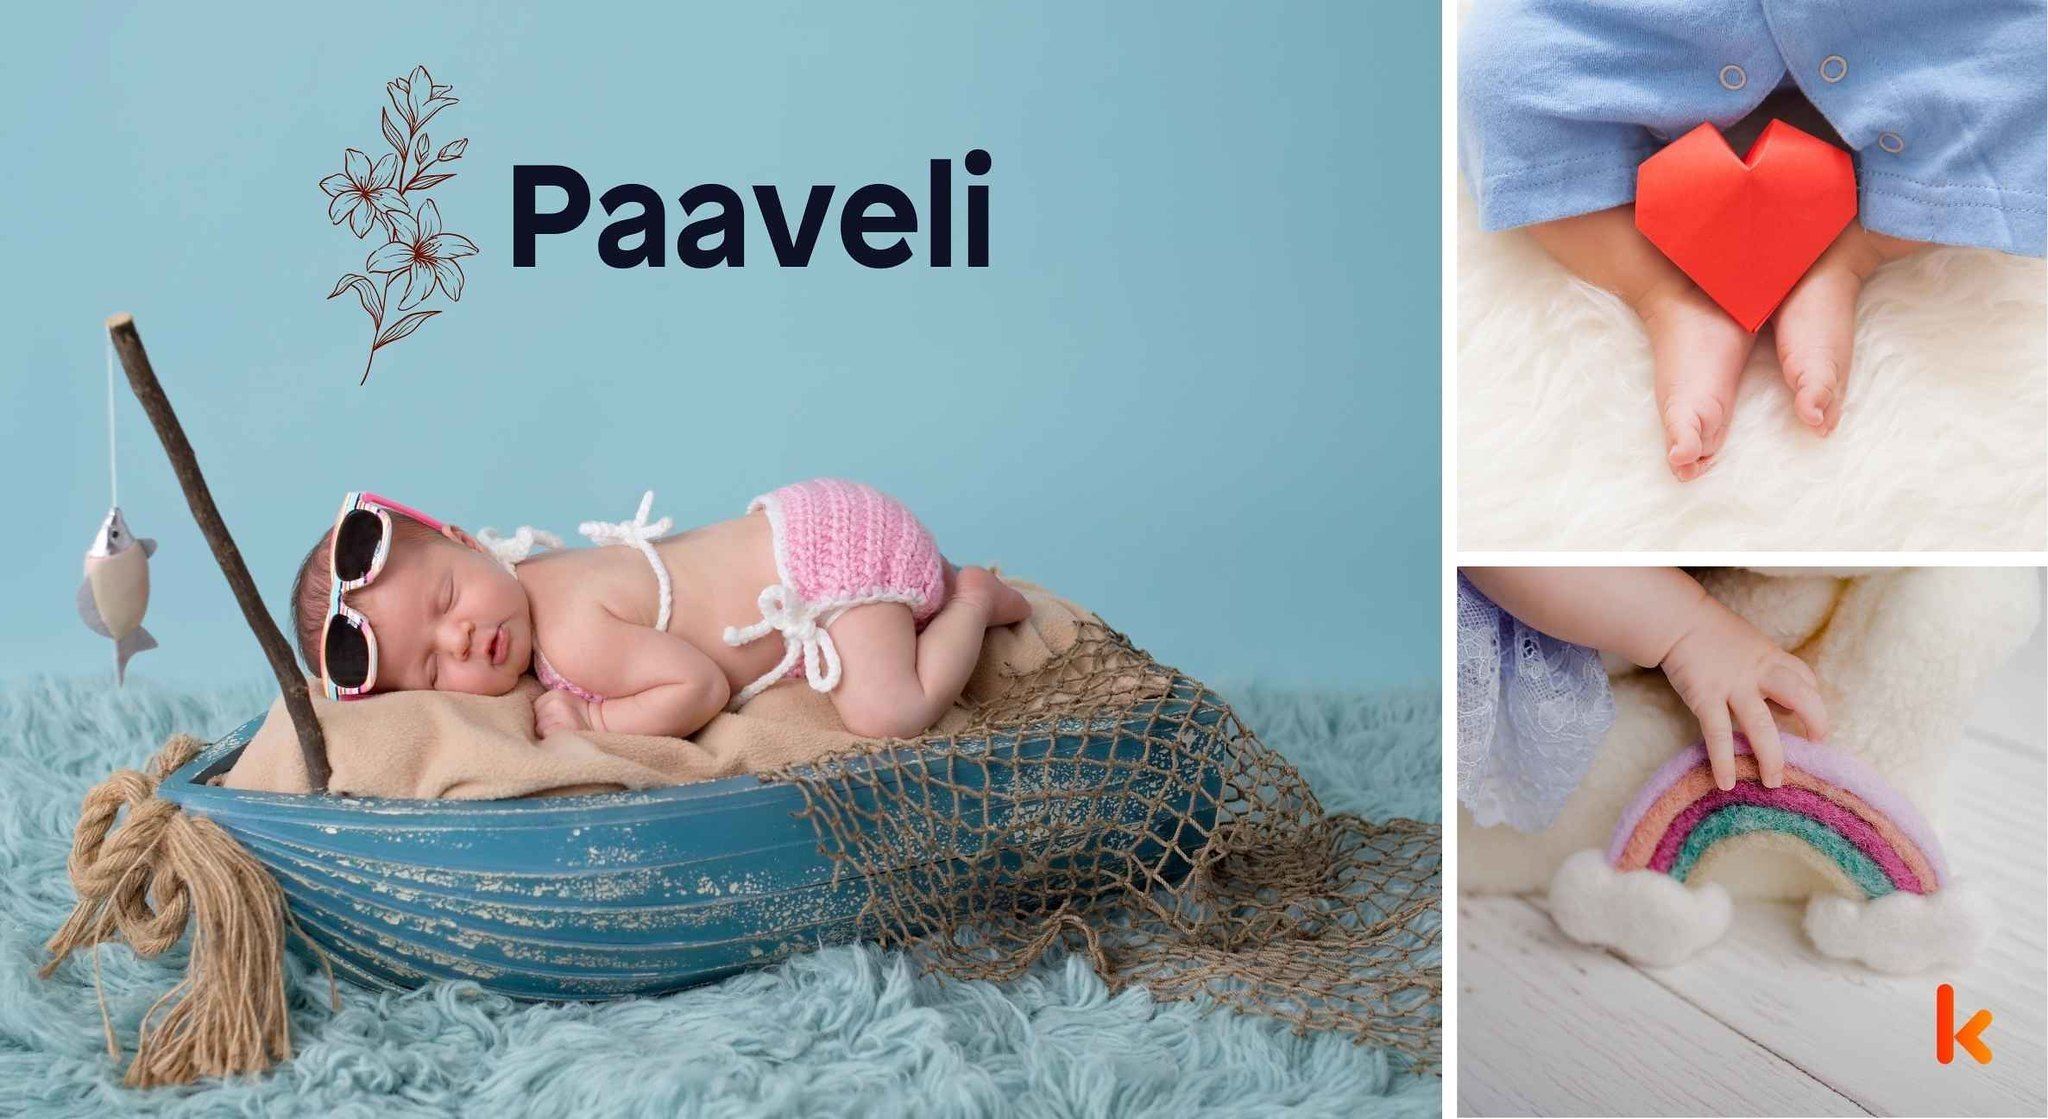 Meaning of the name Paaveli